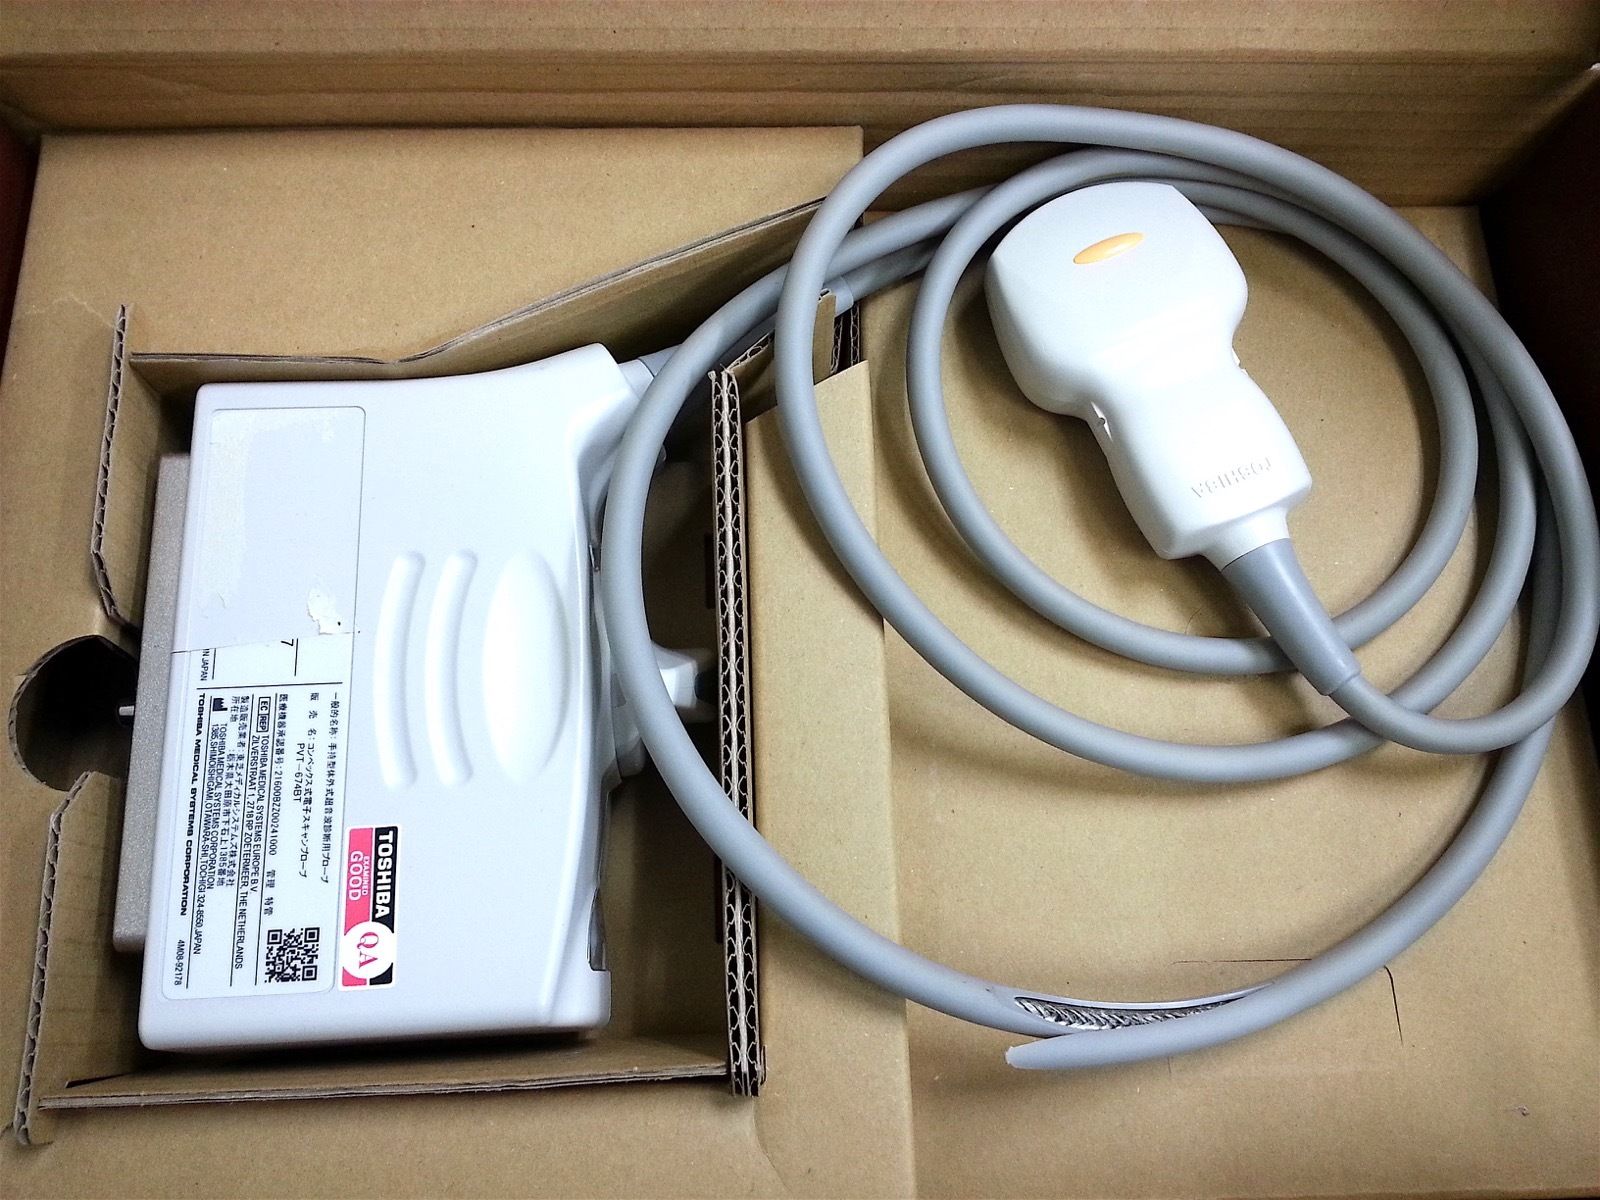 Toshiba PVT-674BT CONVEX ARRAY Ultrasound Transducer Probe **PLEASE READ** DIAGNOSTIC ULTRASOUND MACHINES FOR SALE